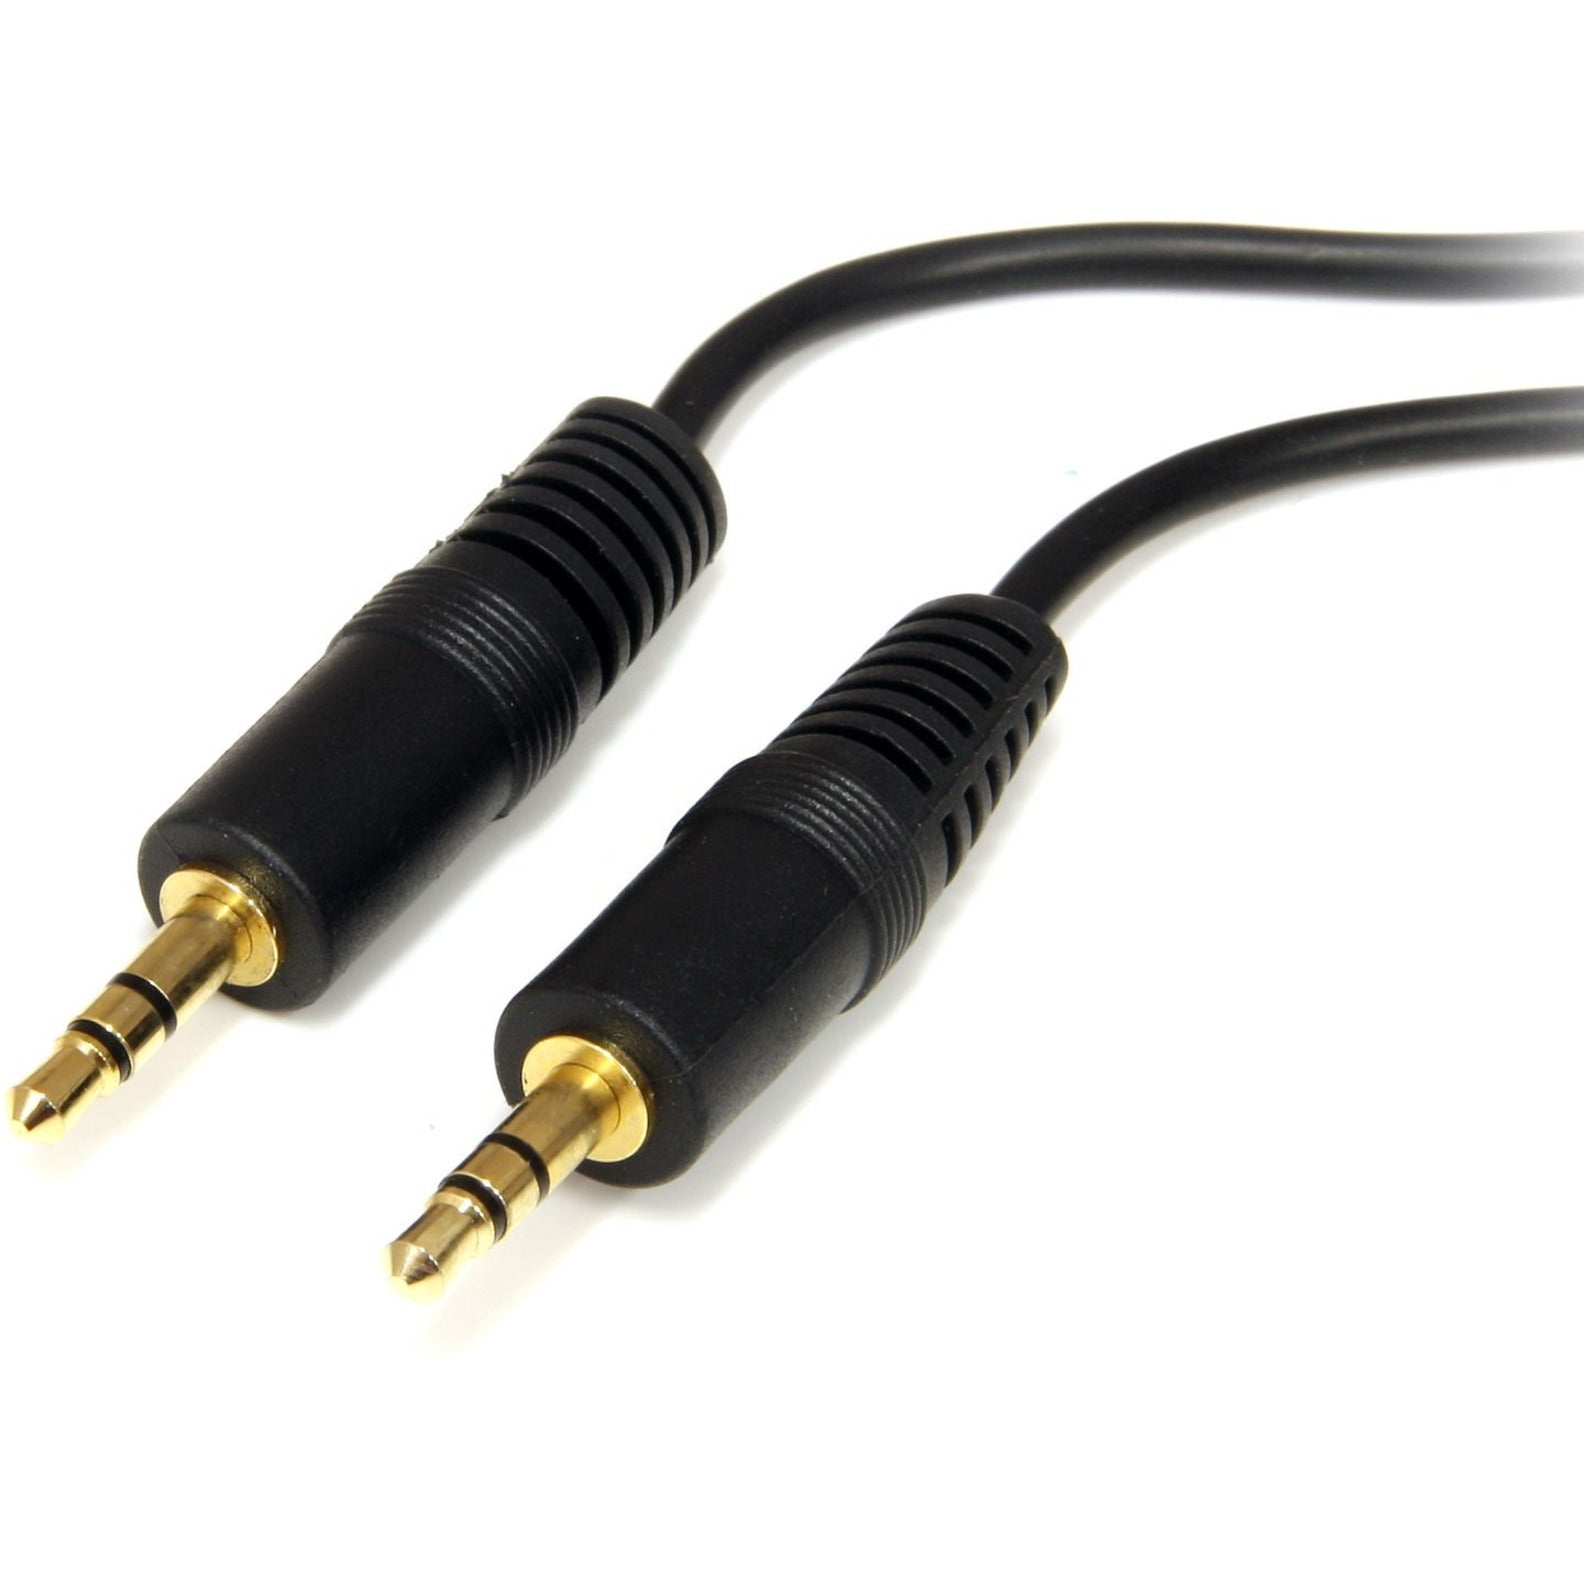 StarTech.com MU6MM 6 ft 3.5mm Stereo Extension Audio Cable, Copper Conductor, Male to Male, Black